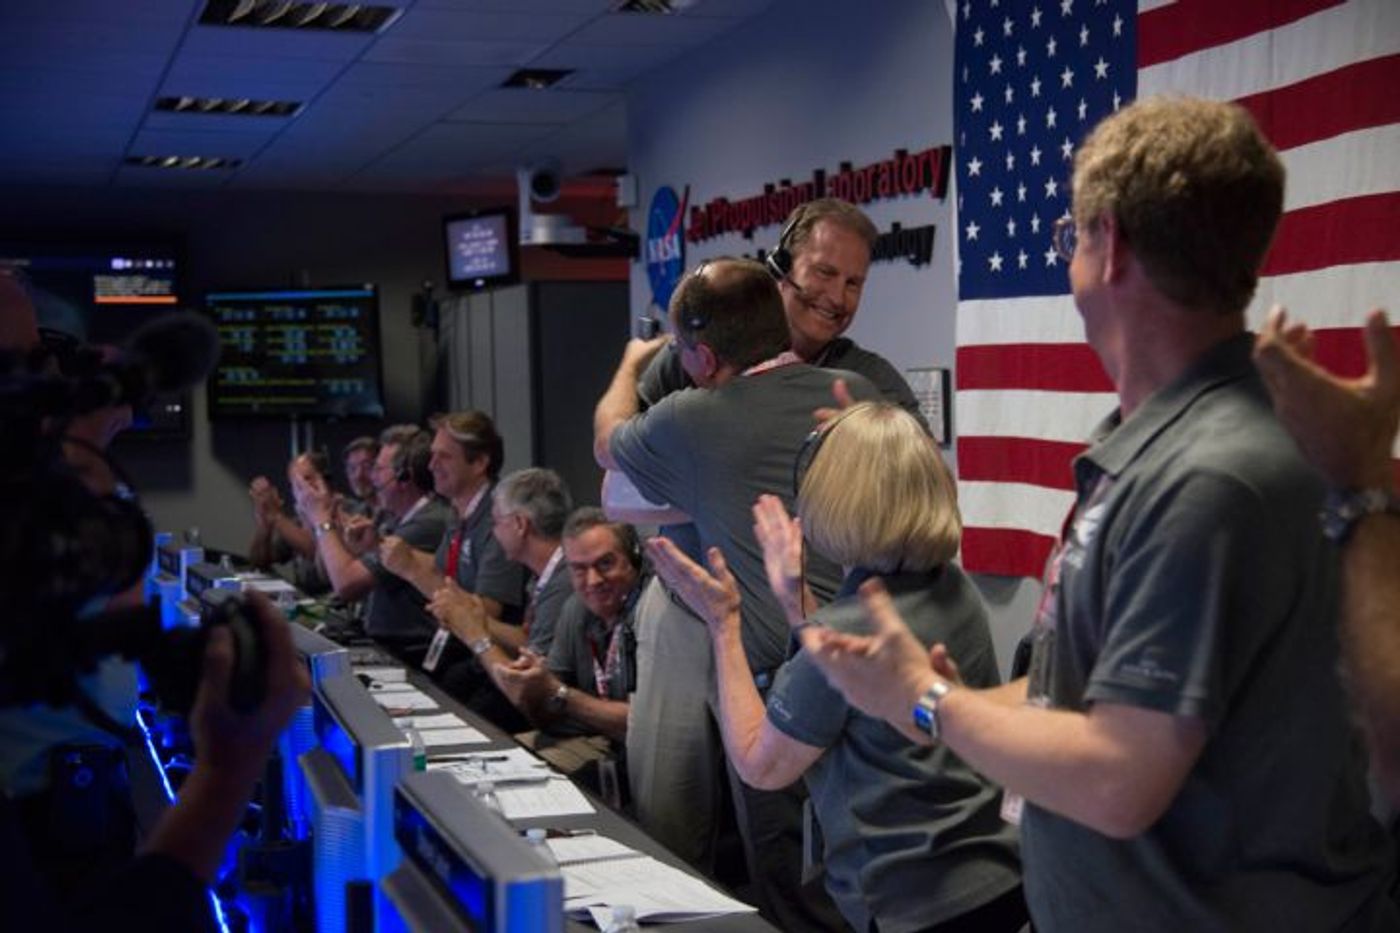 NASA celebrates a successful Juno orbit insertion this 4th of July.